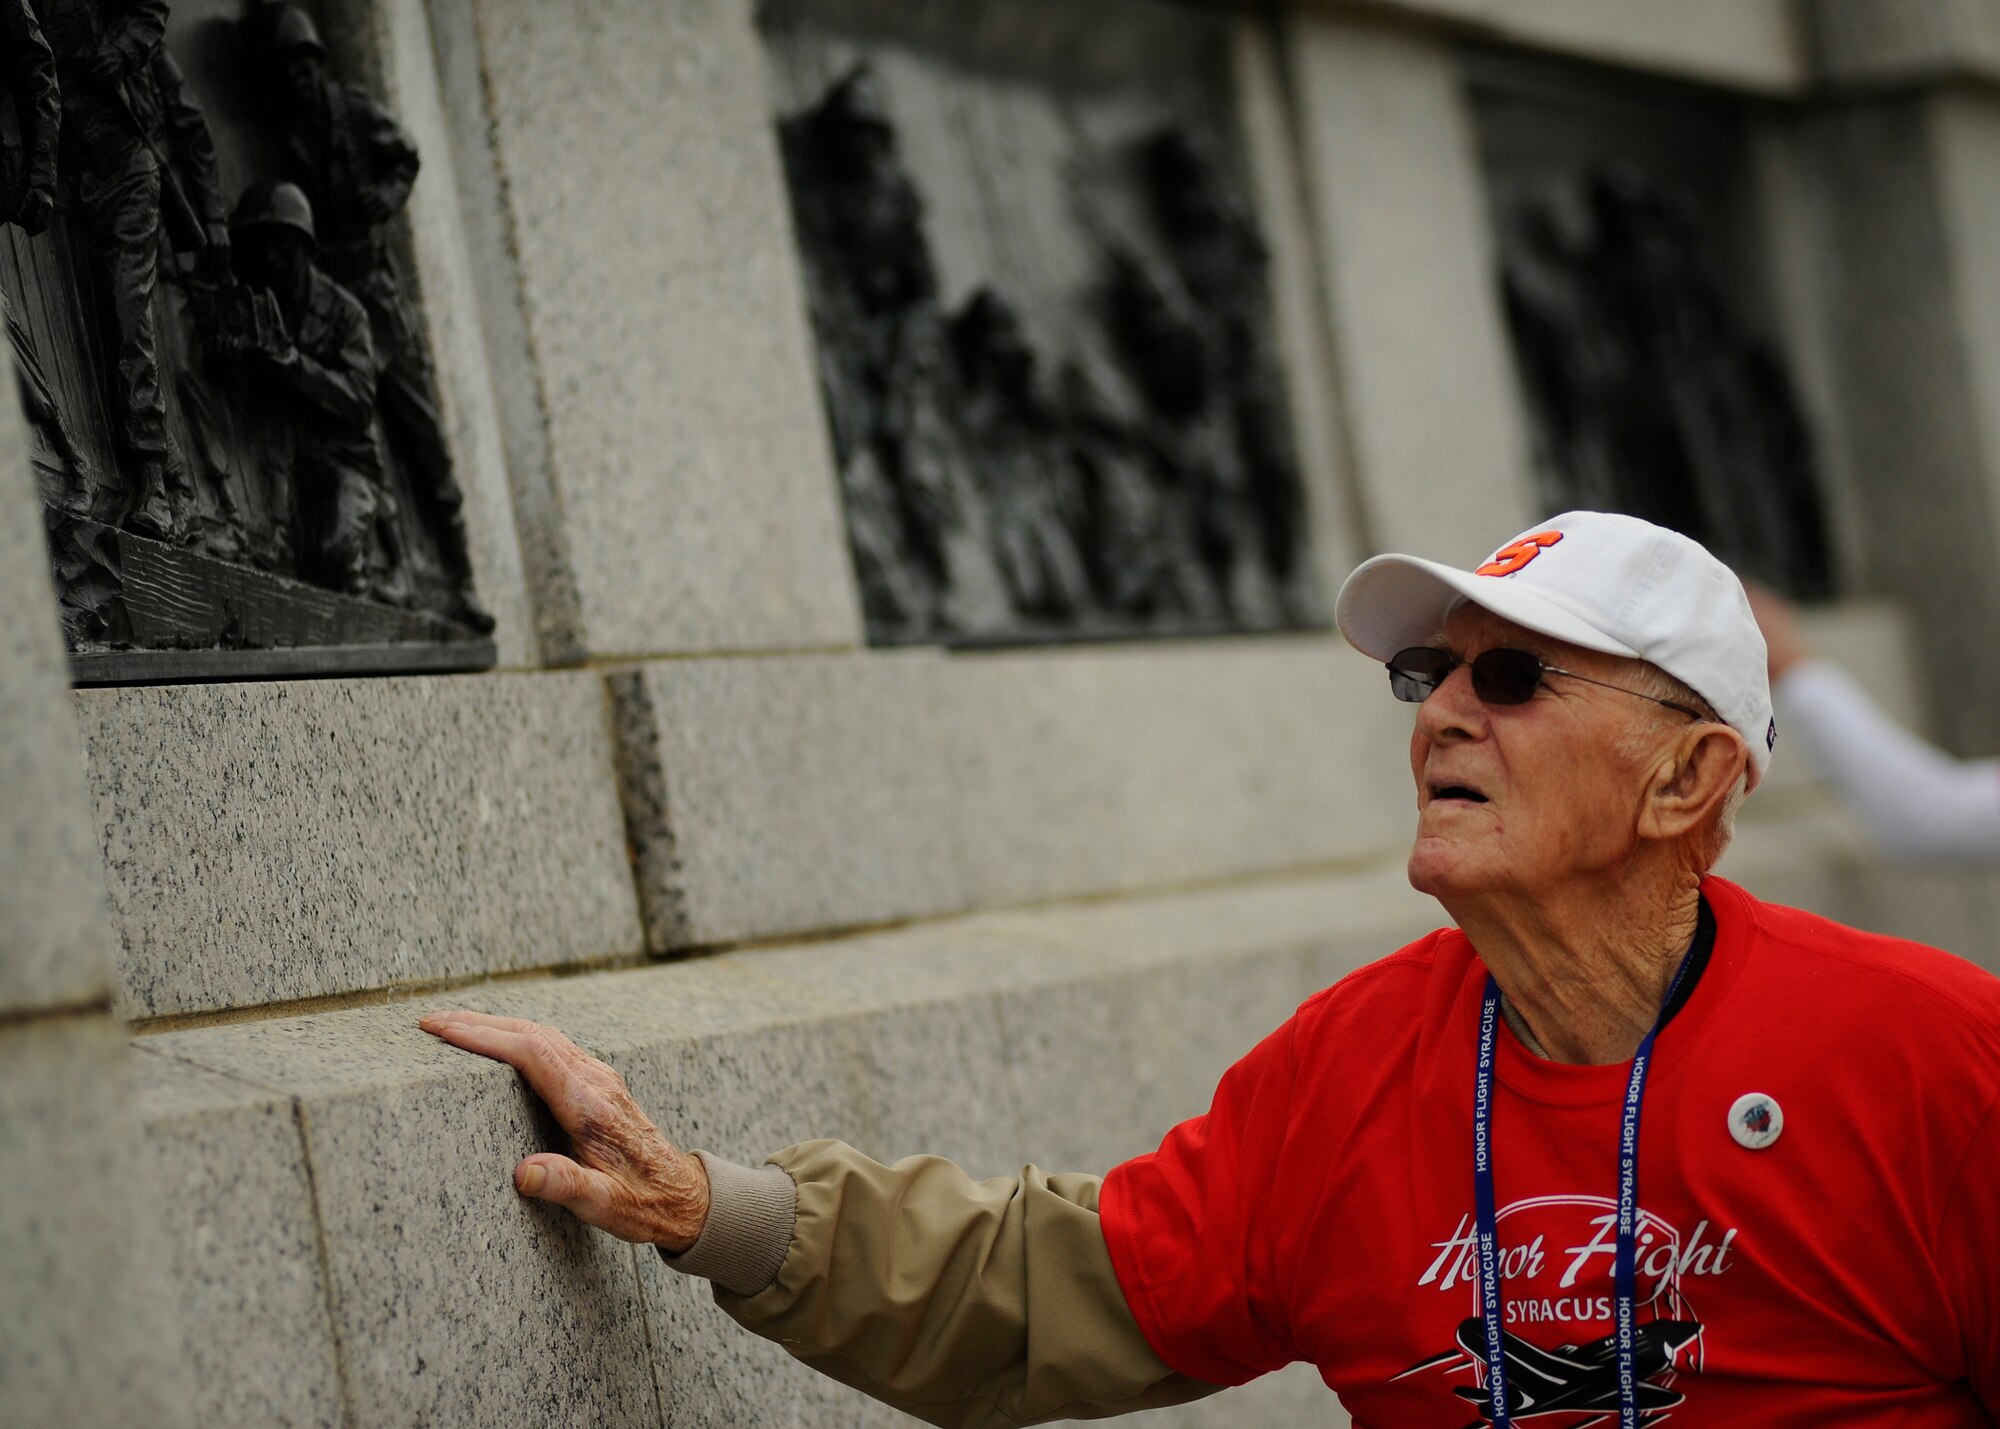 Paul Bowker, a World War II Army veteran, views the bronze artwork depicting the battles fought during World War II as he heads to the heart of the National World War II Memorial in Washington, D.C., April 30, 2016. Bowker is part of the Honor Flight Network’s Syracuse flight. (U.S. Air Force photo/Tech. Sgt. Bryan Franks)